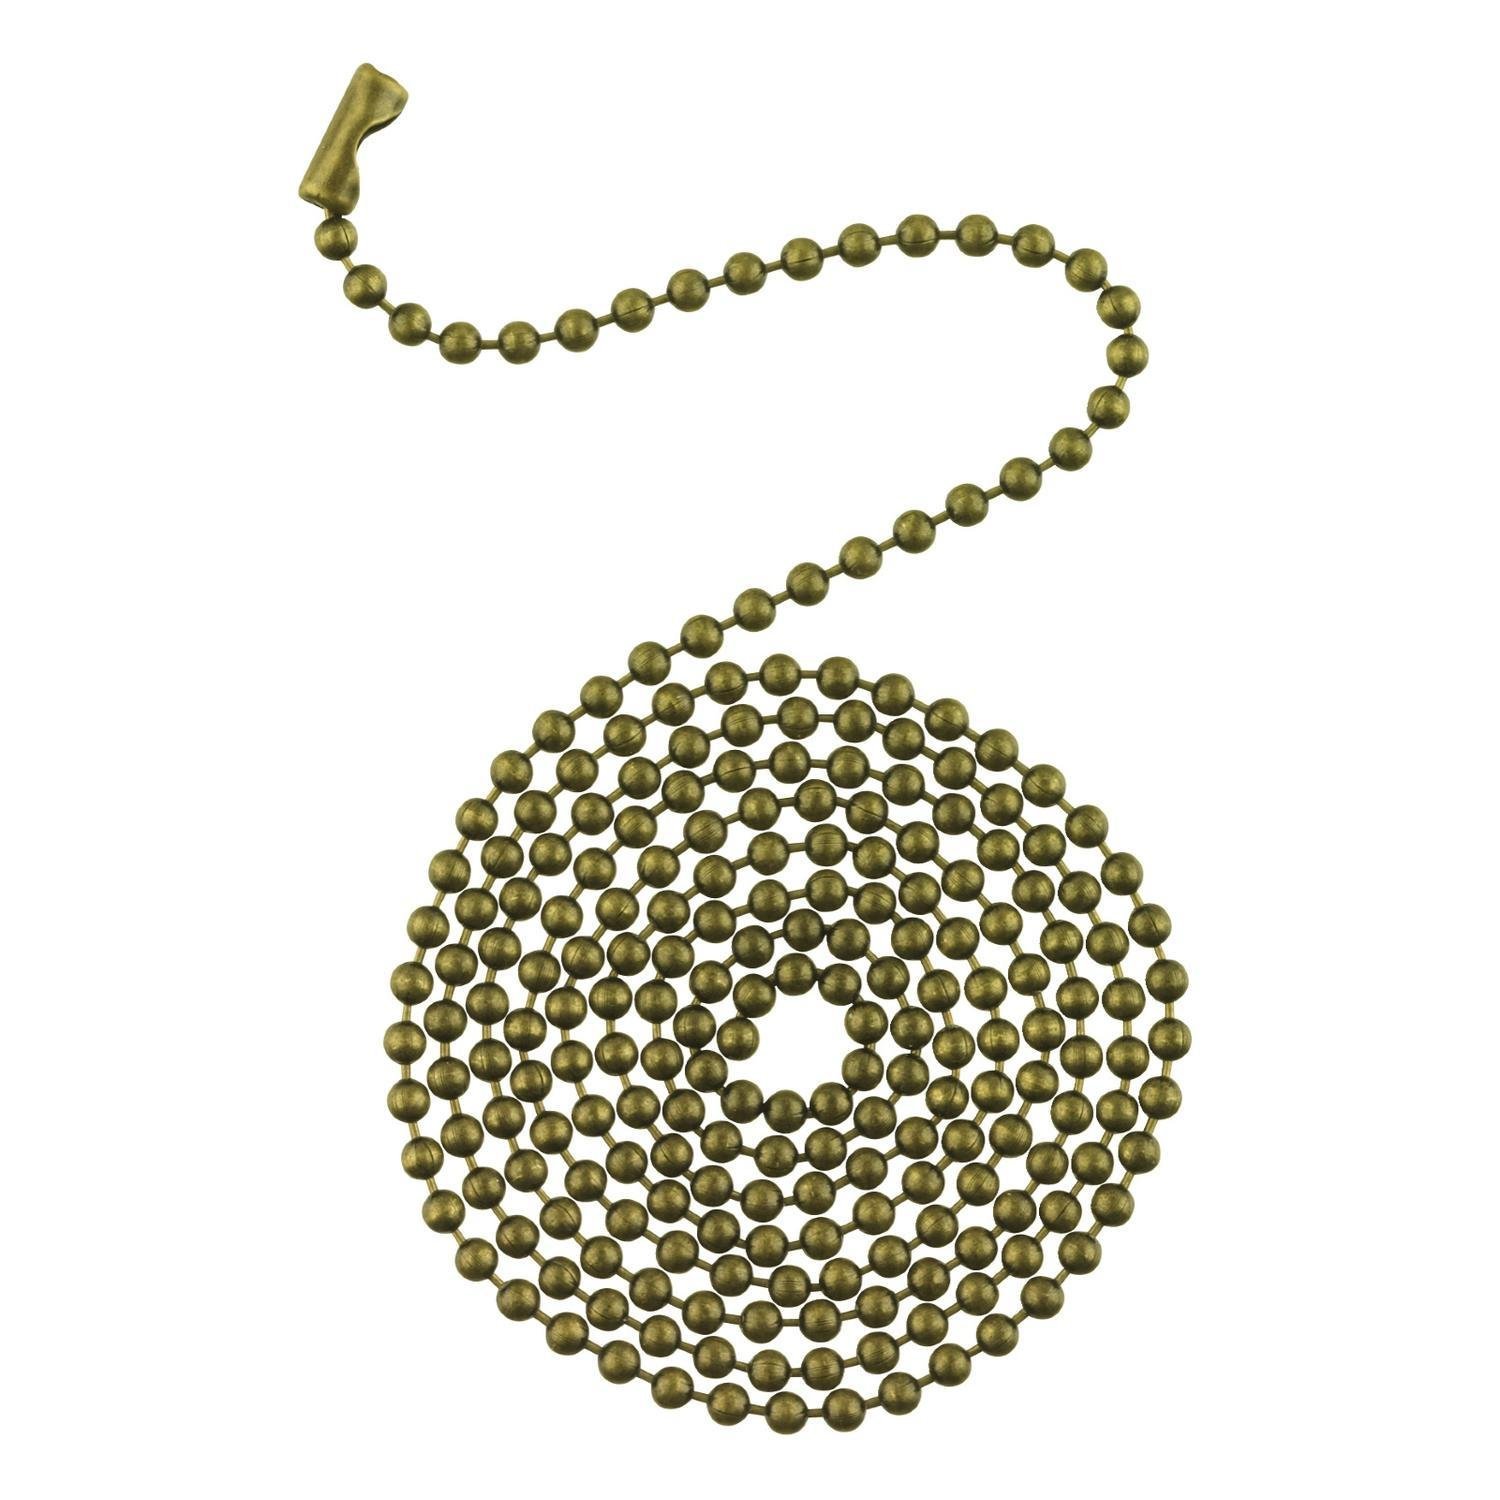 3 Ft. Beaded Chain with Connector Antique Brass Finish